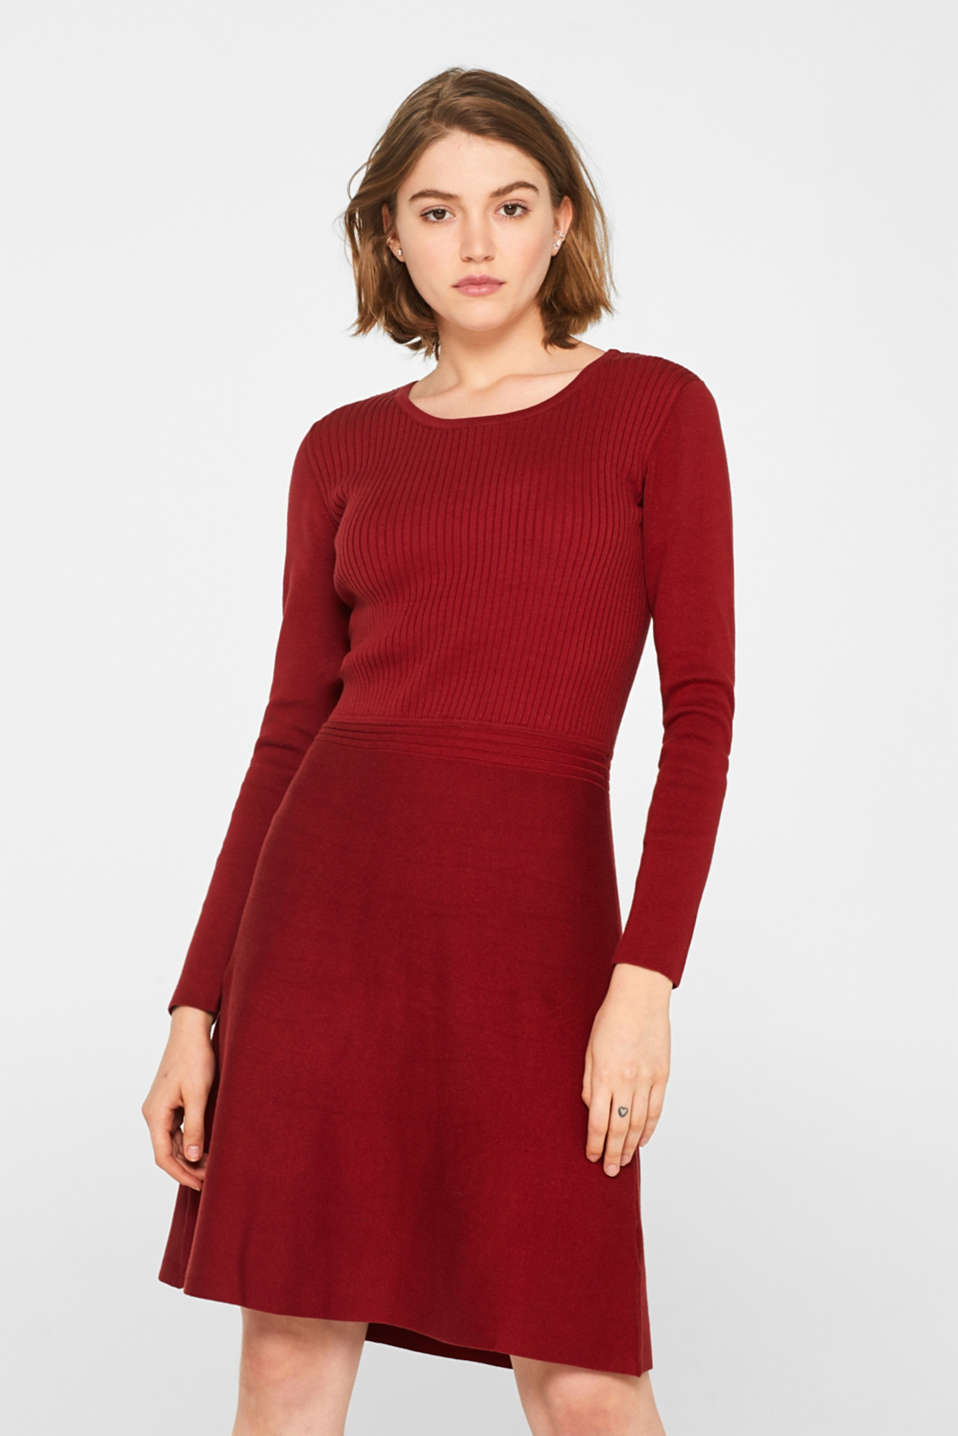 edc - Knit dress with a ribbed texture at our Online Shop